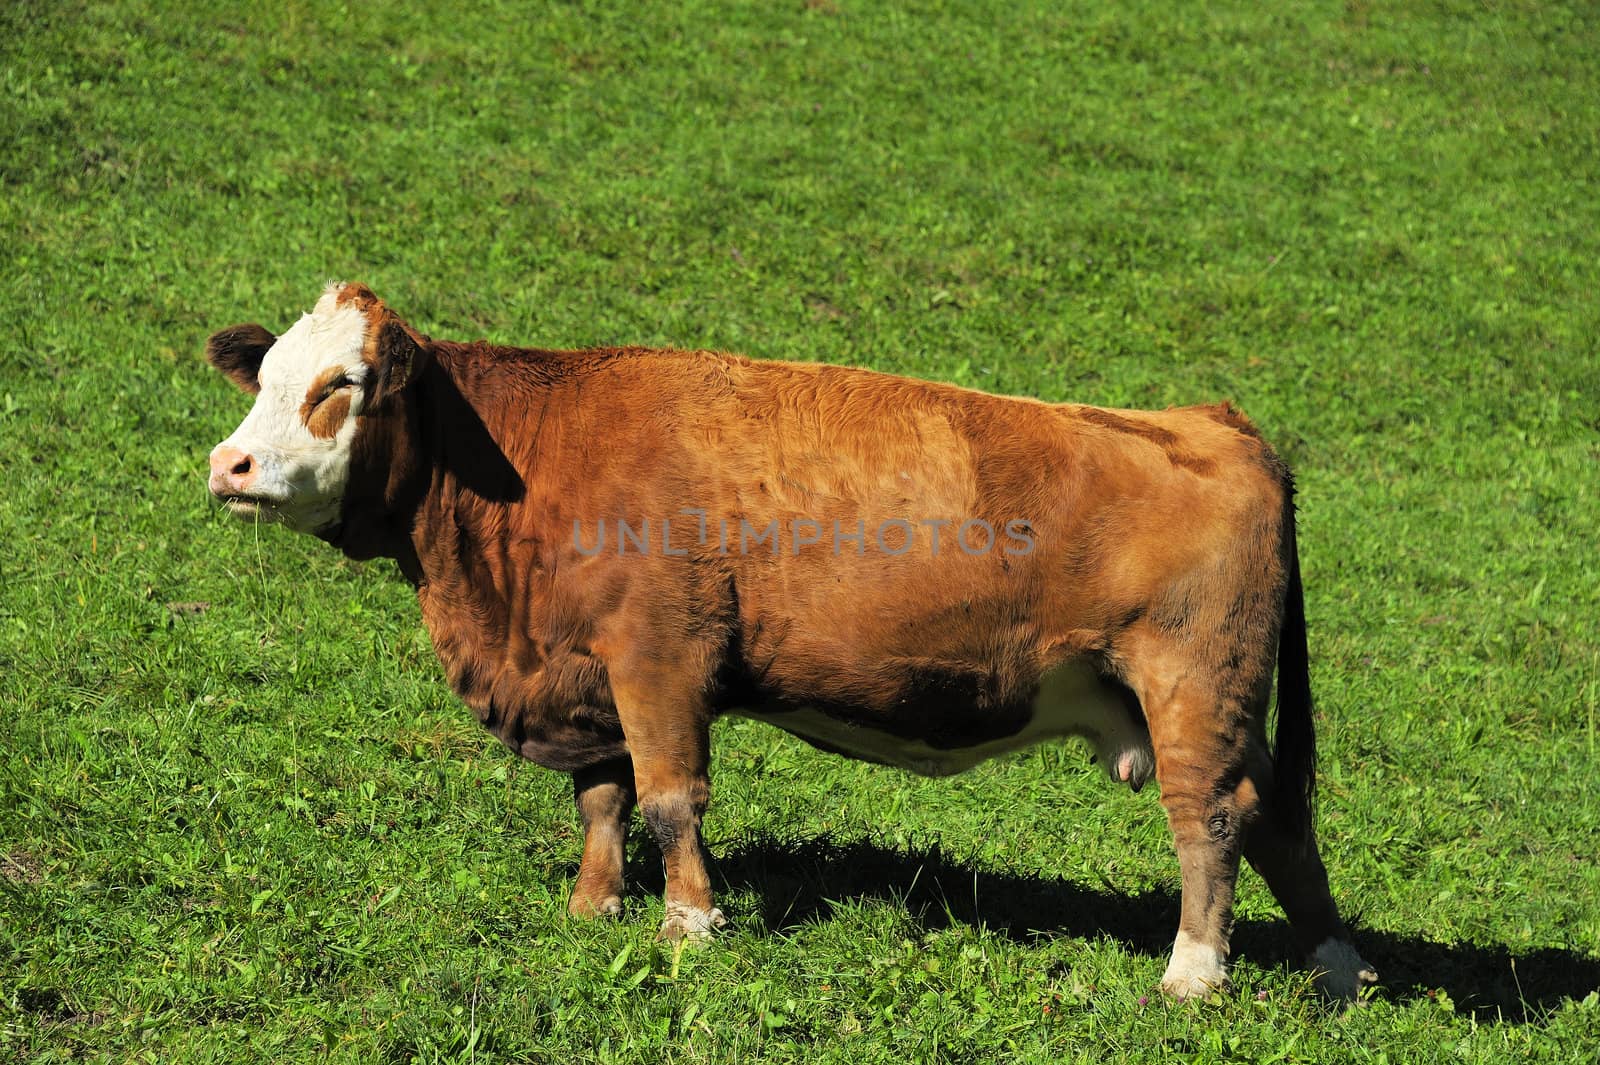 Hereford heifer, chewing grass, against a green background